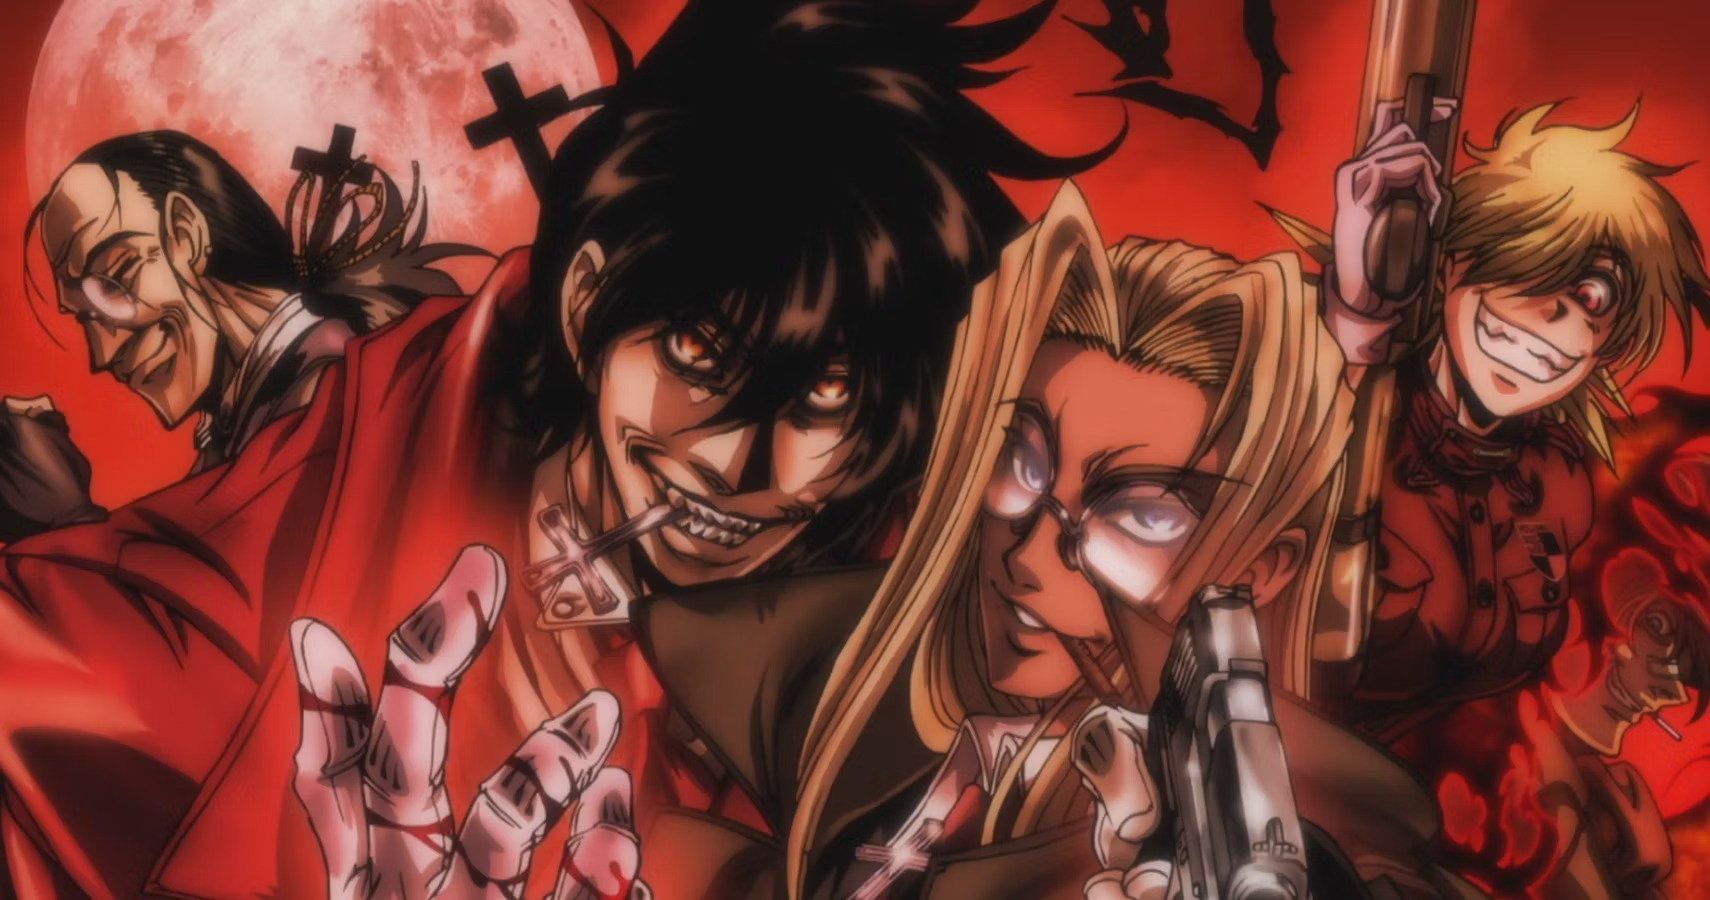 Hellsing Ultimate anime characters poster